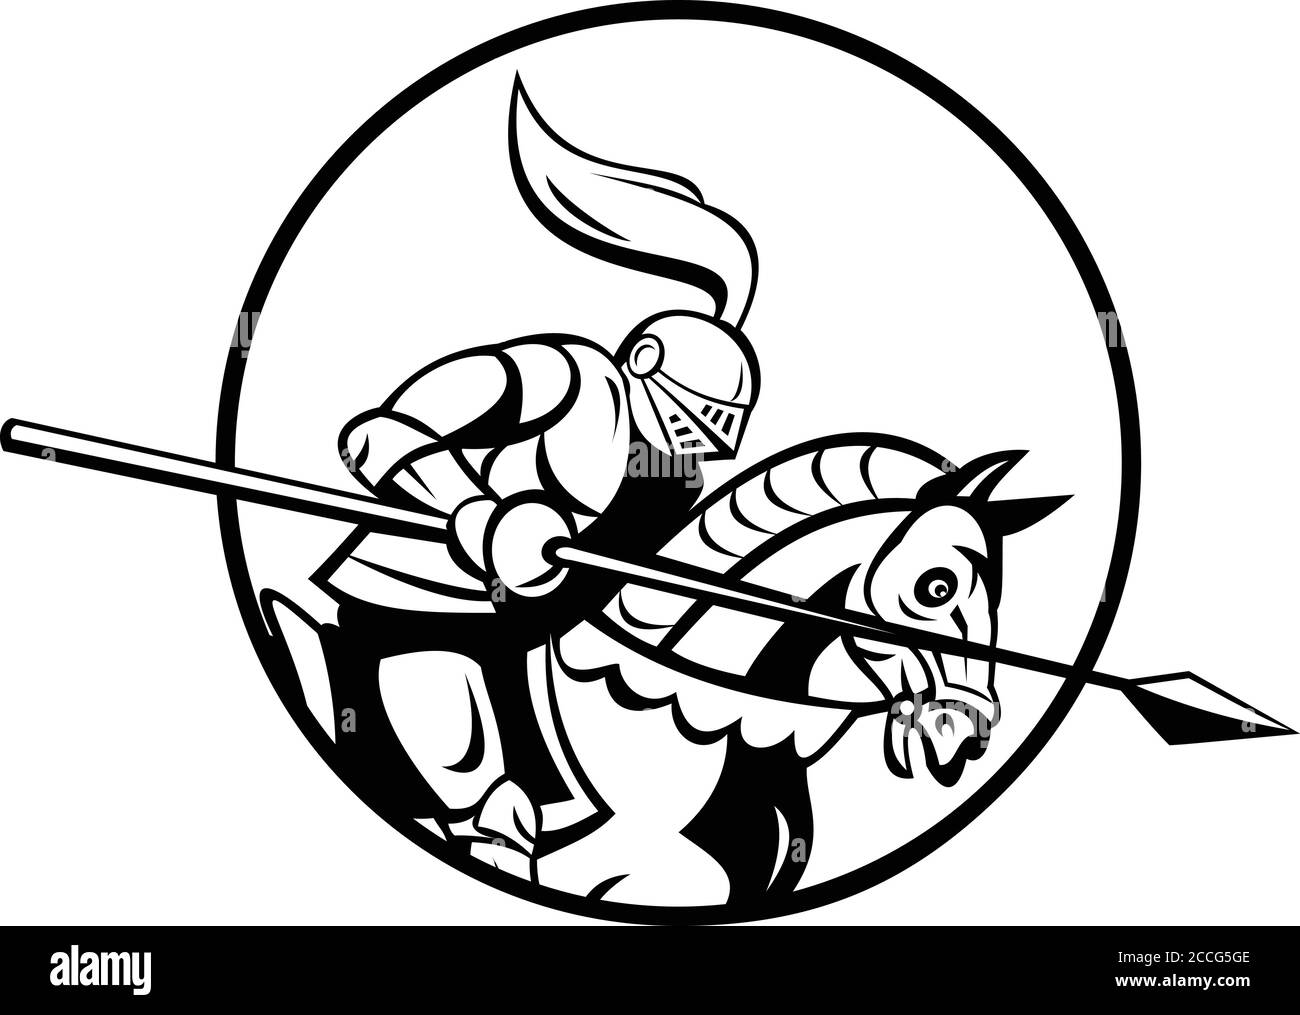 Retro style illustration of a medieval knight with lance riding steed set inside circle viewed from side on isolated background done in black and whit Stock Vector